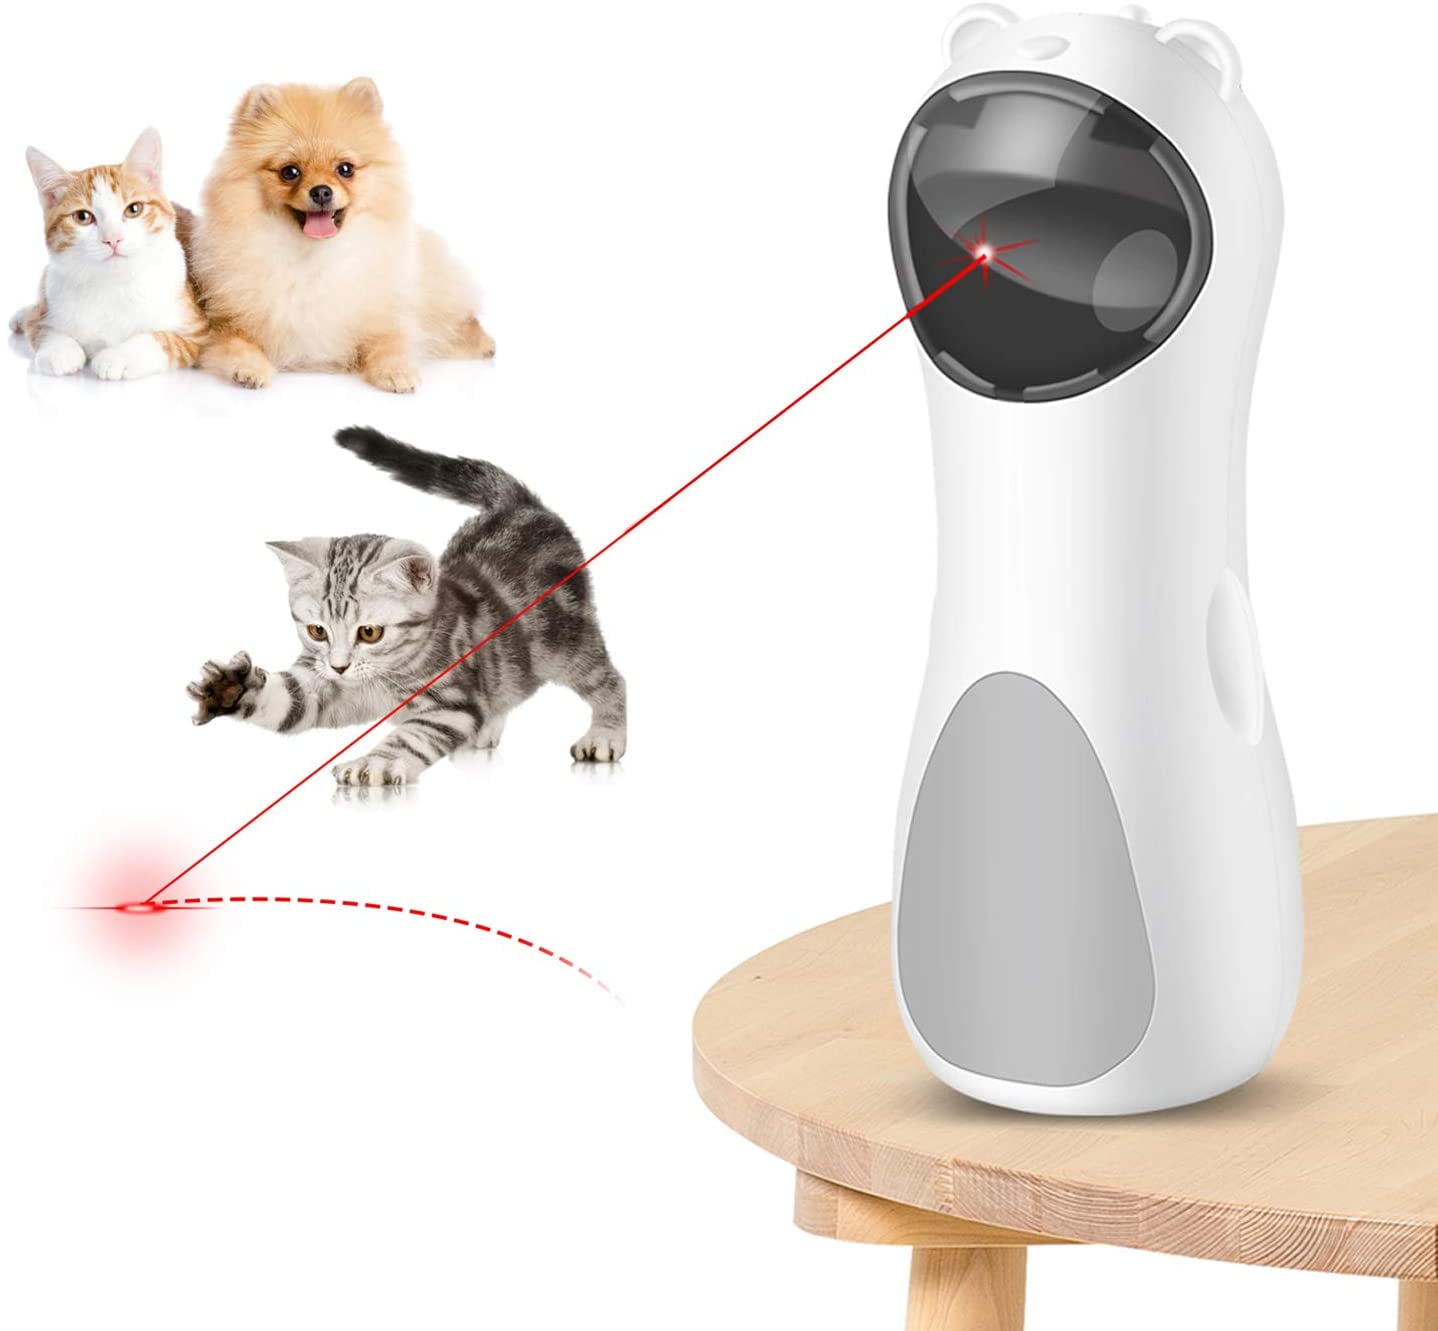 Cat Laser Toy Automatic,Interactive Cat Laser Toy,Pet Chasing Toy,Cat Laser Pointer,Cat Light Toy Laser,Cat Indoor Electric Toy for Chasing,5 Random Pattern,Automatic On/Off and Silent 